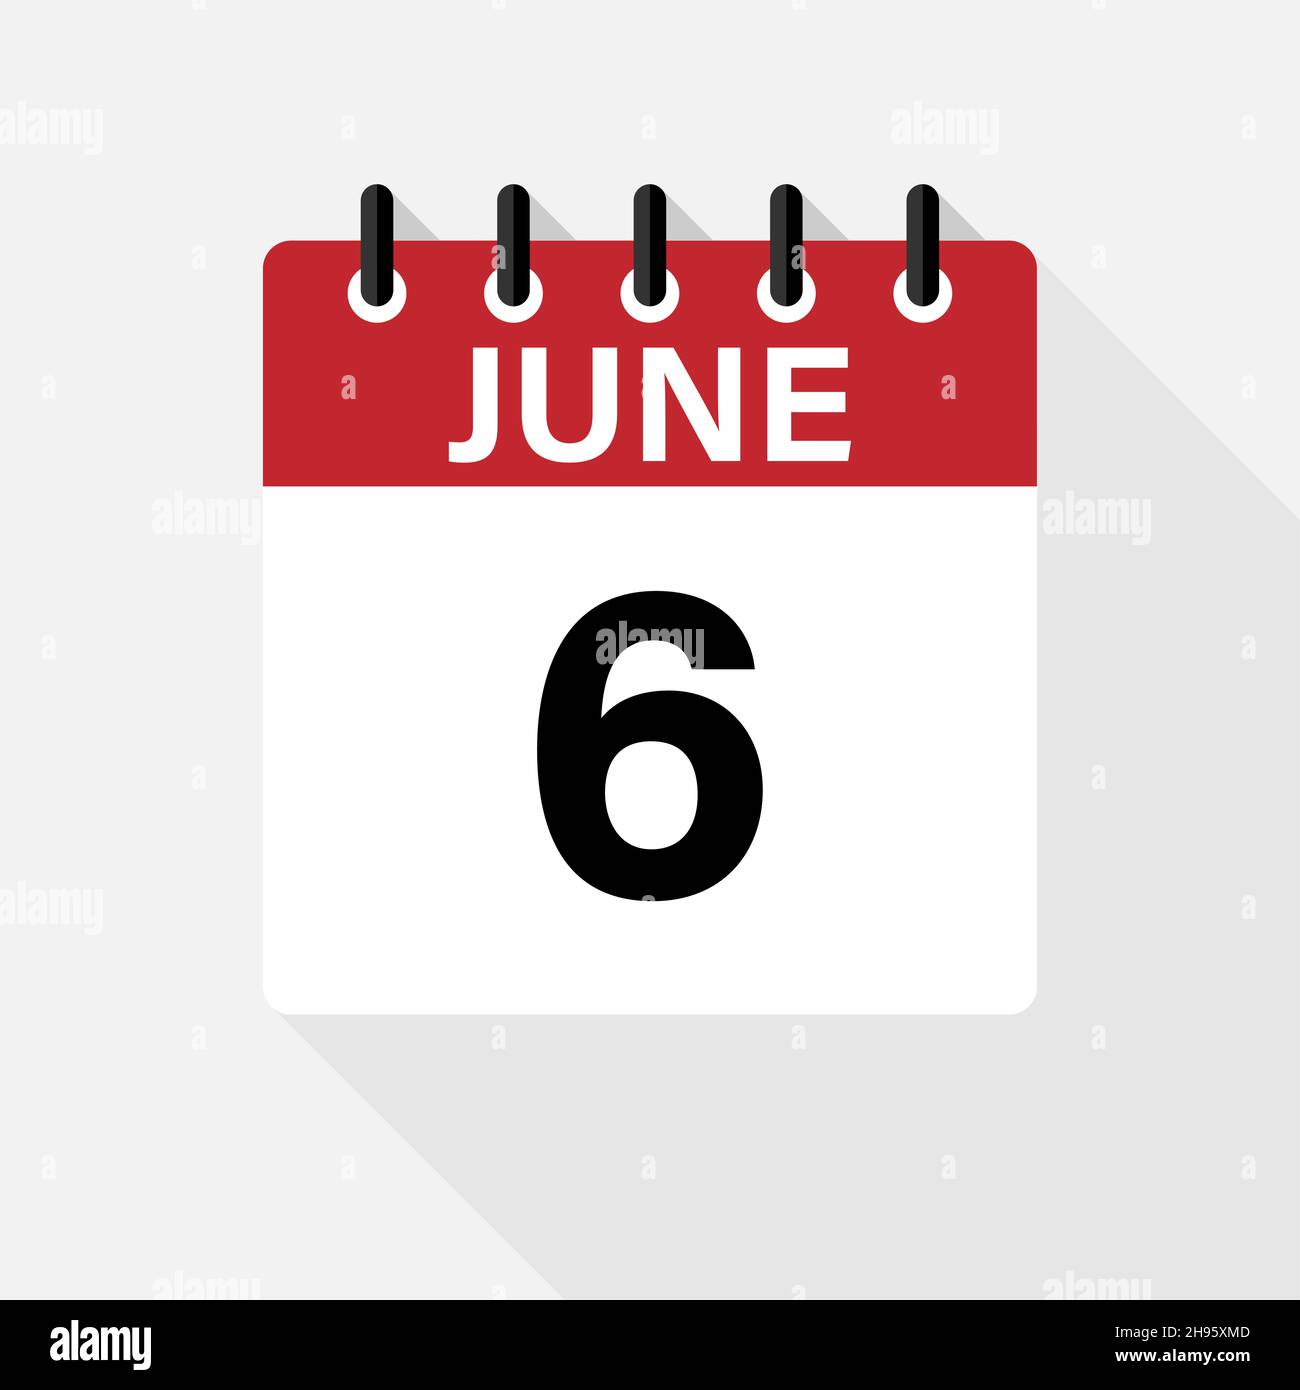 June Calendar Icon. Calendar Icon with shadow. Flat style. Date, day and month. Stock Vector